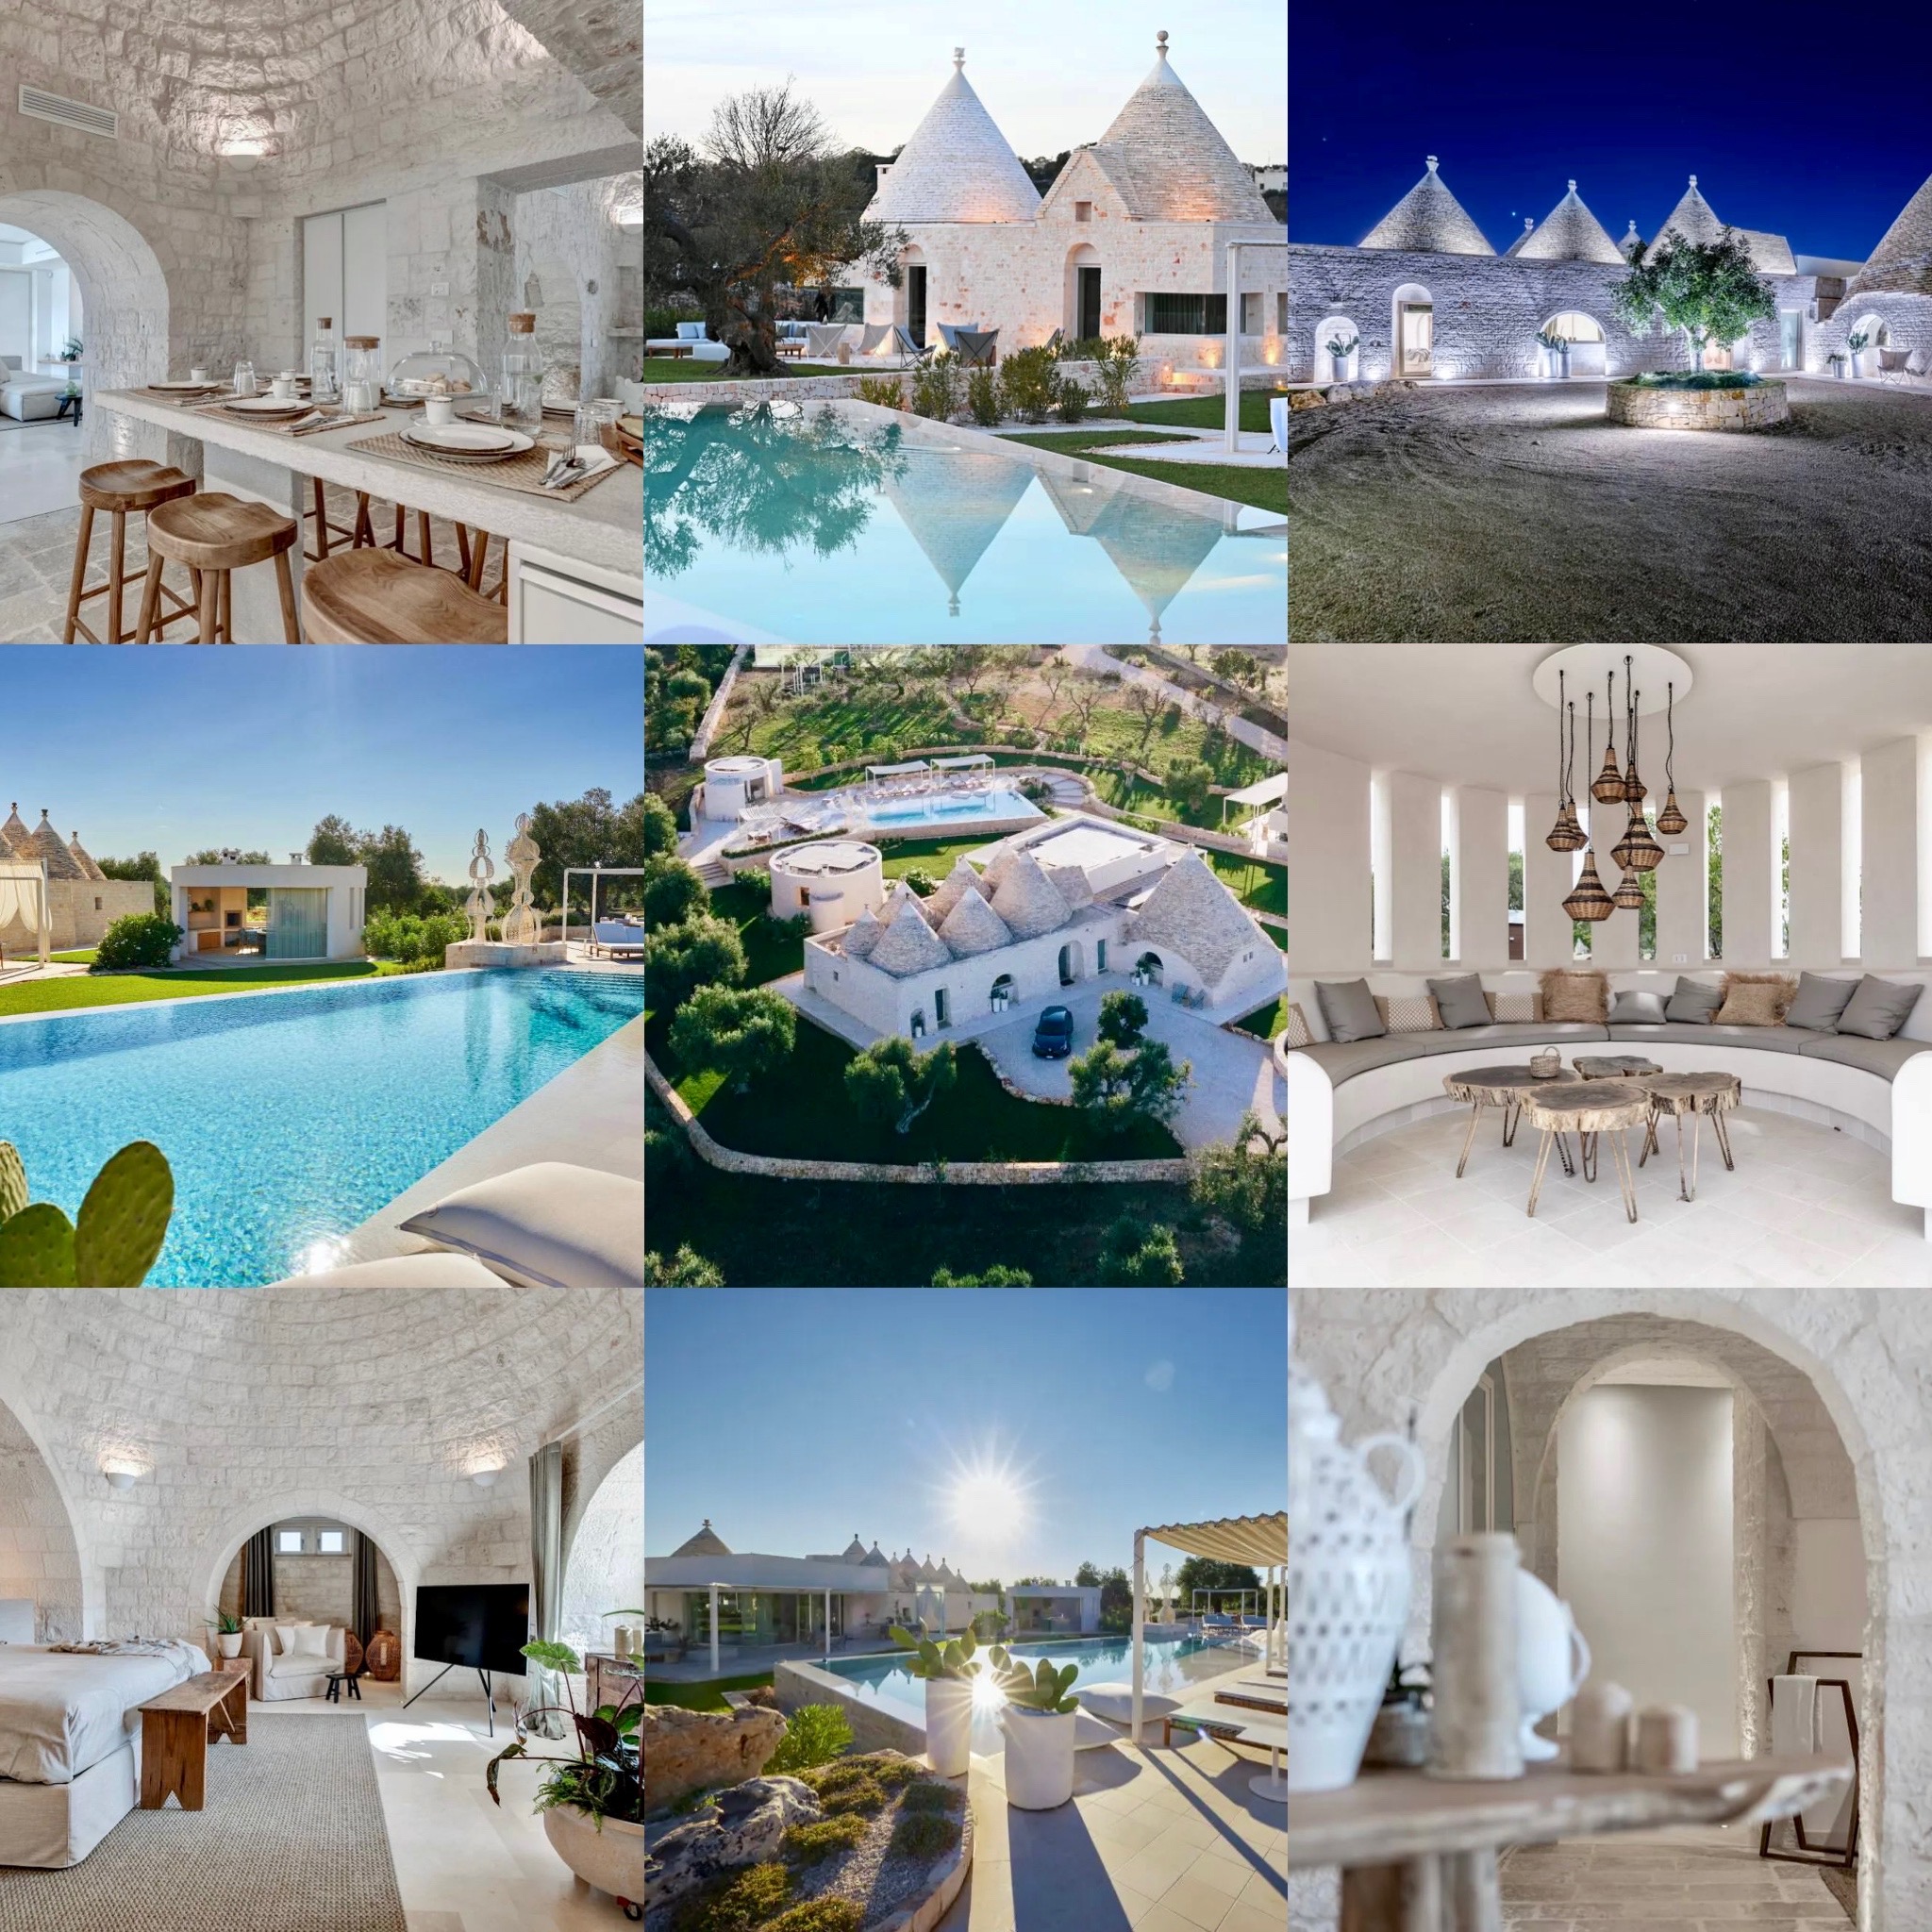 A STAY IN TRULLO MO: AN UNFORGETTABLE EXPERIENCED